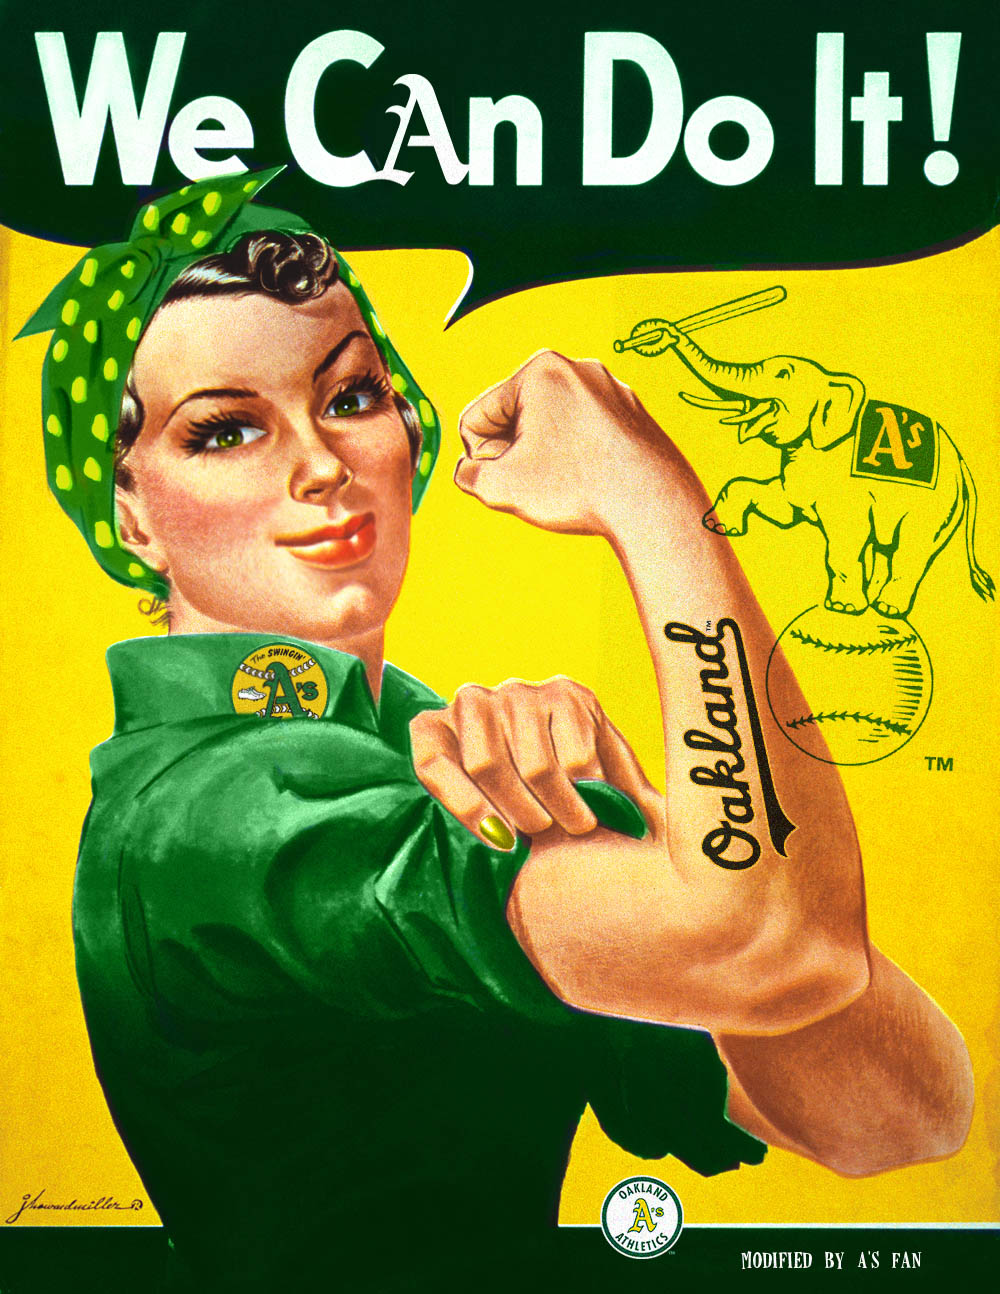 We can do it - Oakland Athletics